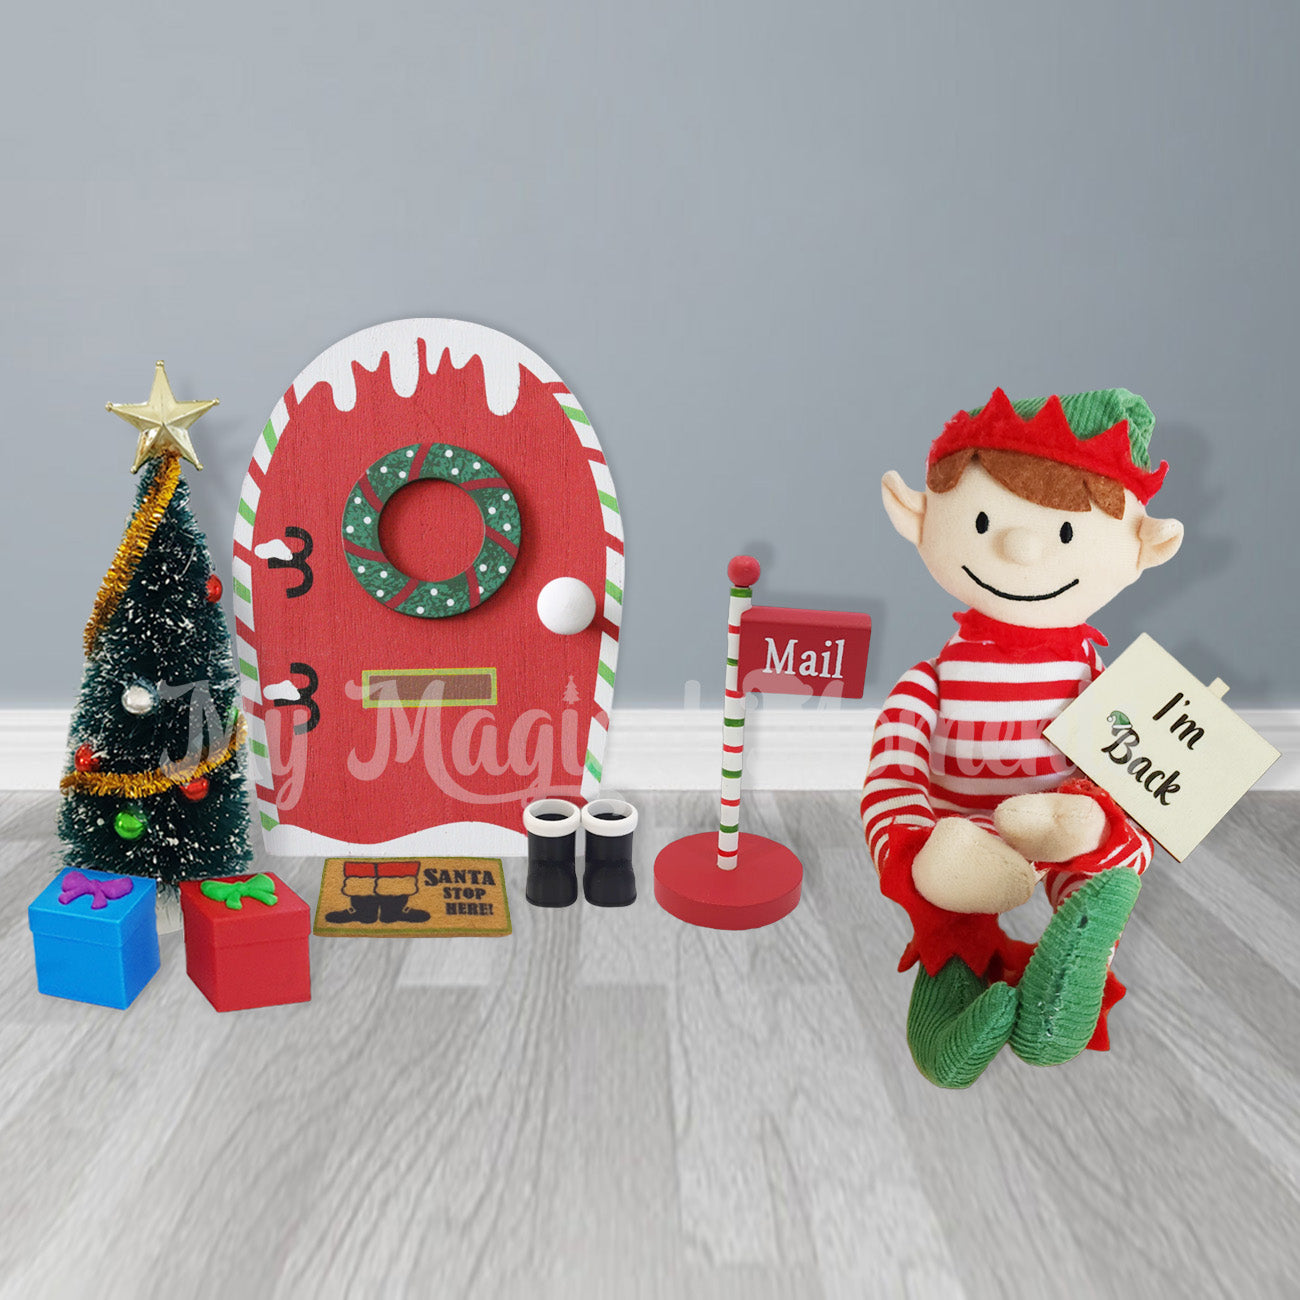 an elf holding an I'm back sign next to an elf door, christmas tree and miniature elf accessories